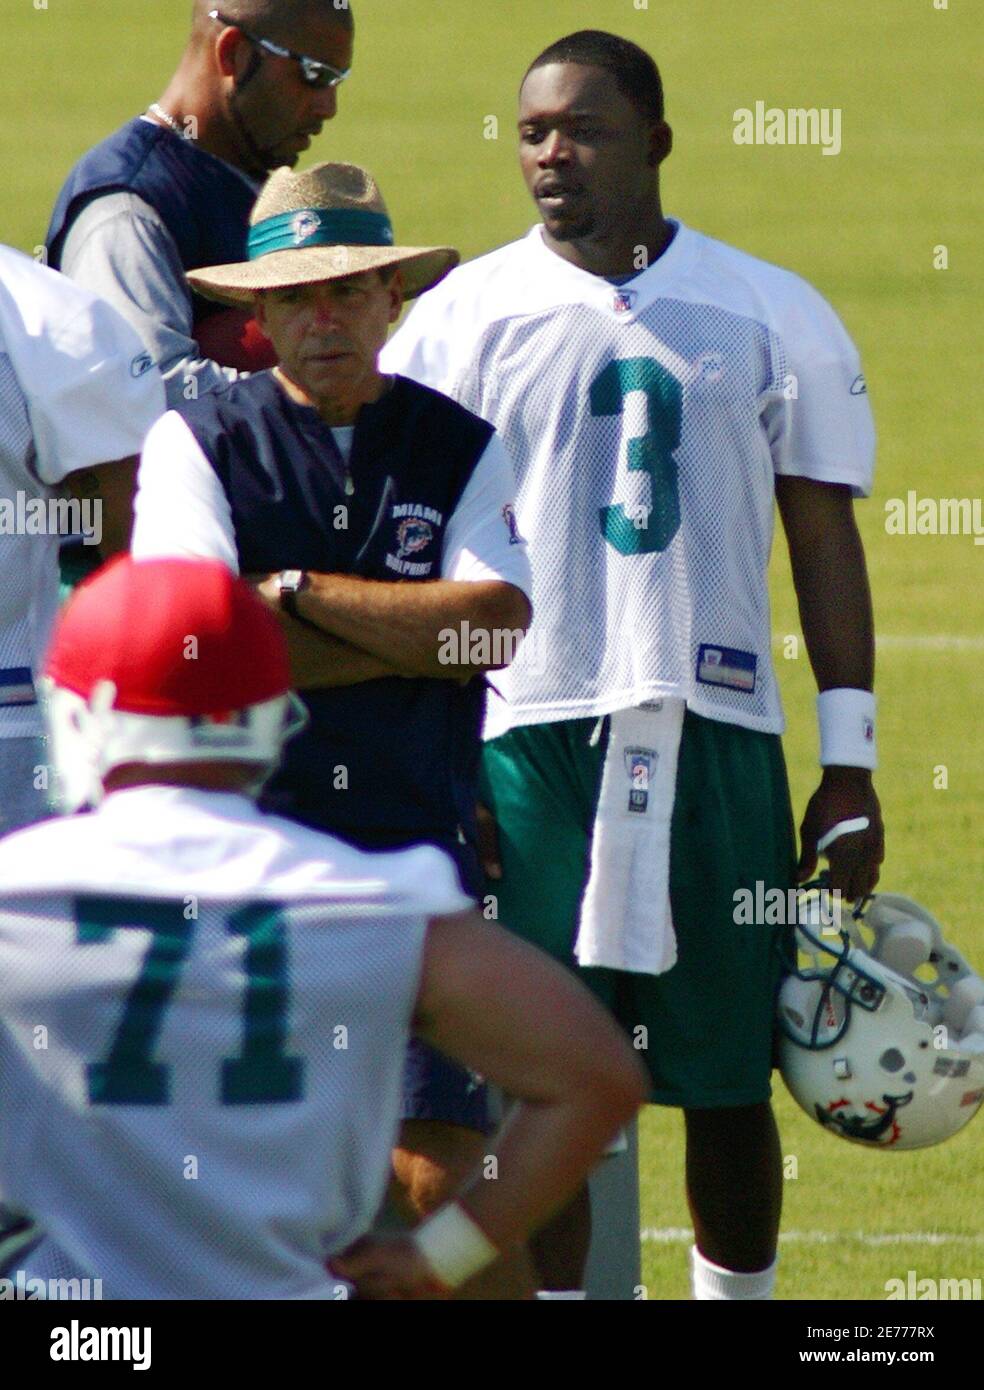 Miami Dolphins head coach Nick Saban (center) stands with rookie un-drafted  quarterback Marcus Vick (3) during mini camp in Davie, Florida, May 5,  2006. Vick is the younger brother of Atlanta Falcons